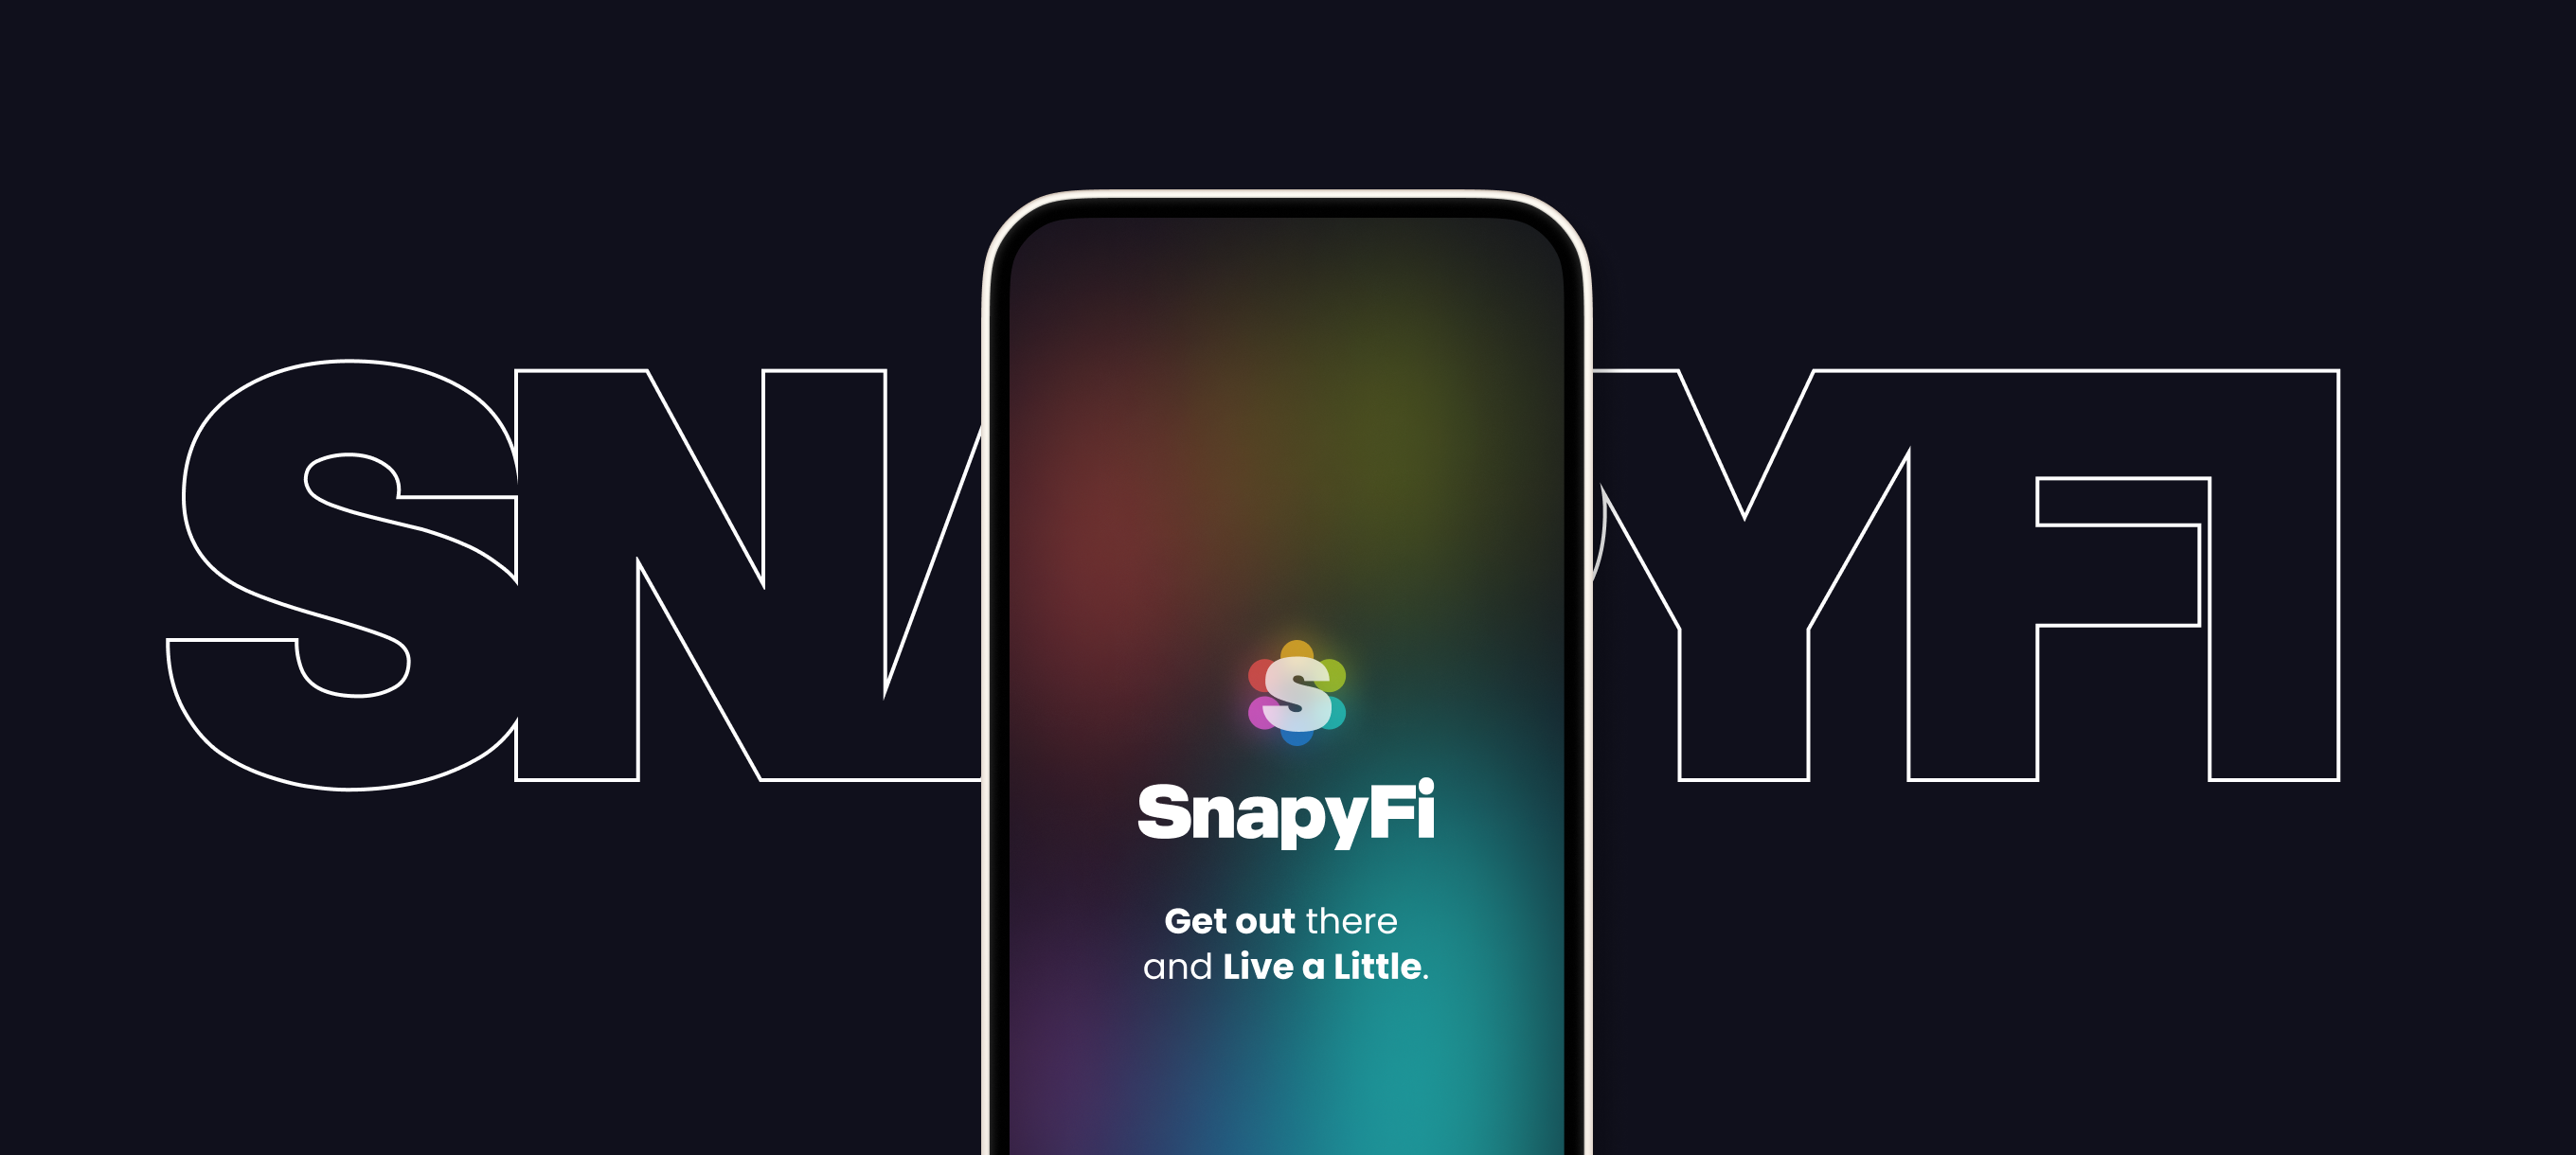 truequations client Snapify